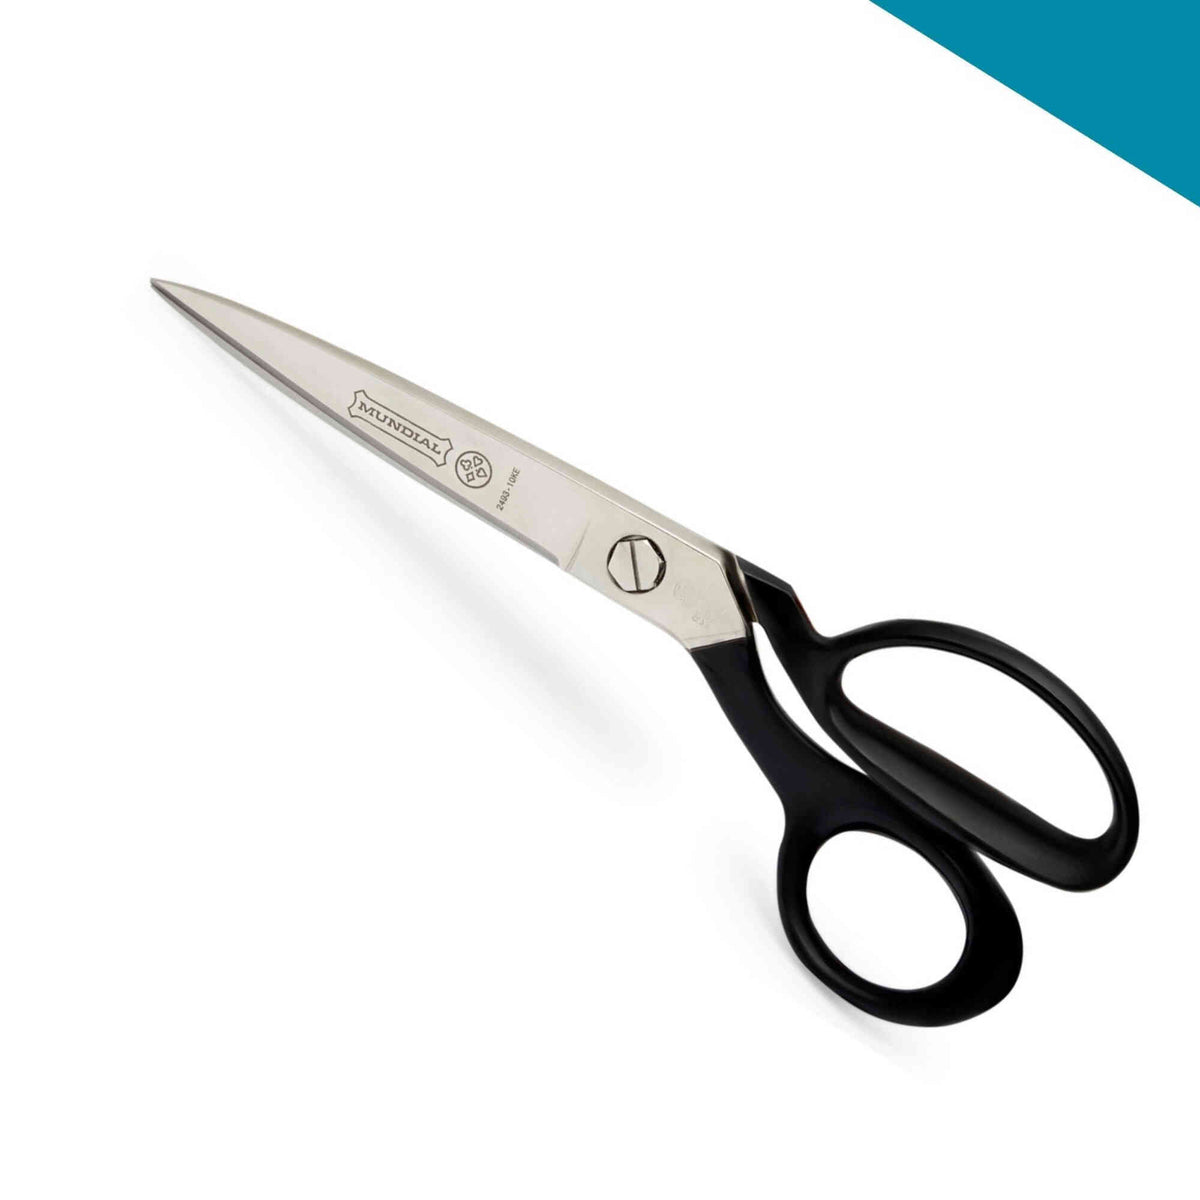 Mundial Sewlite 4 Sewing/Embroidery Scissors - SANE - Sewing and